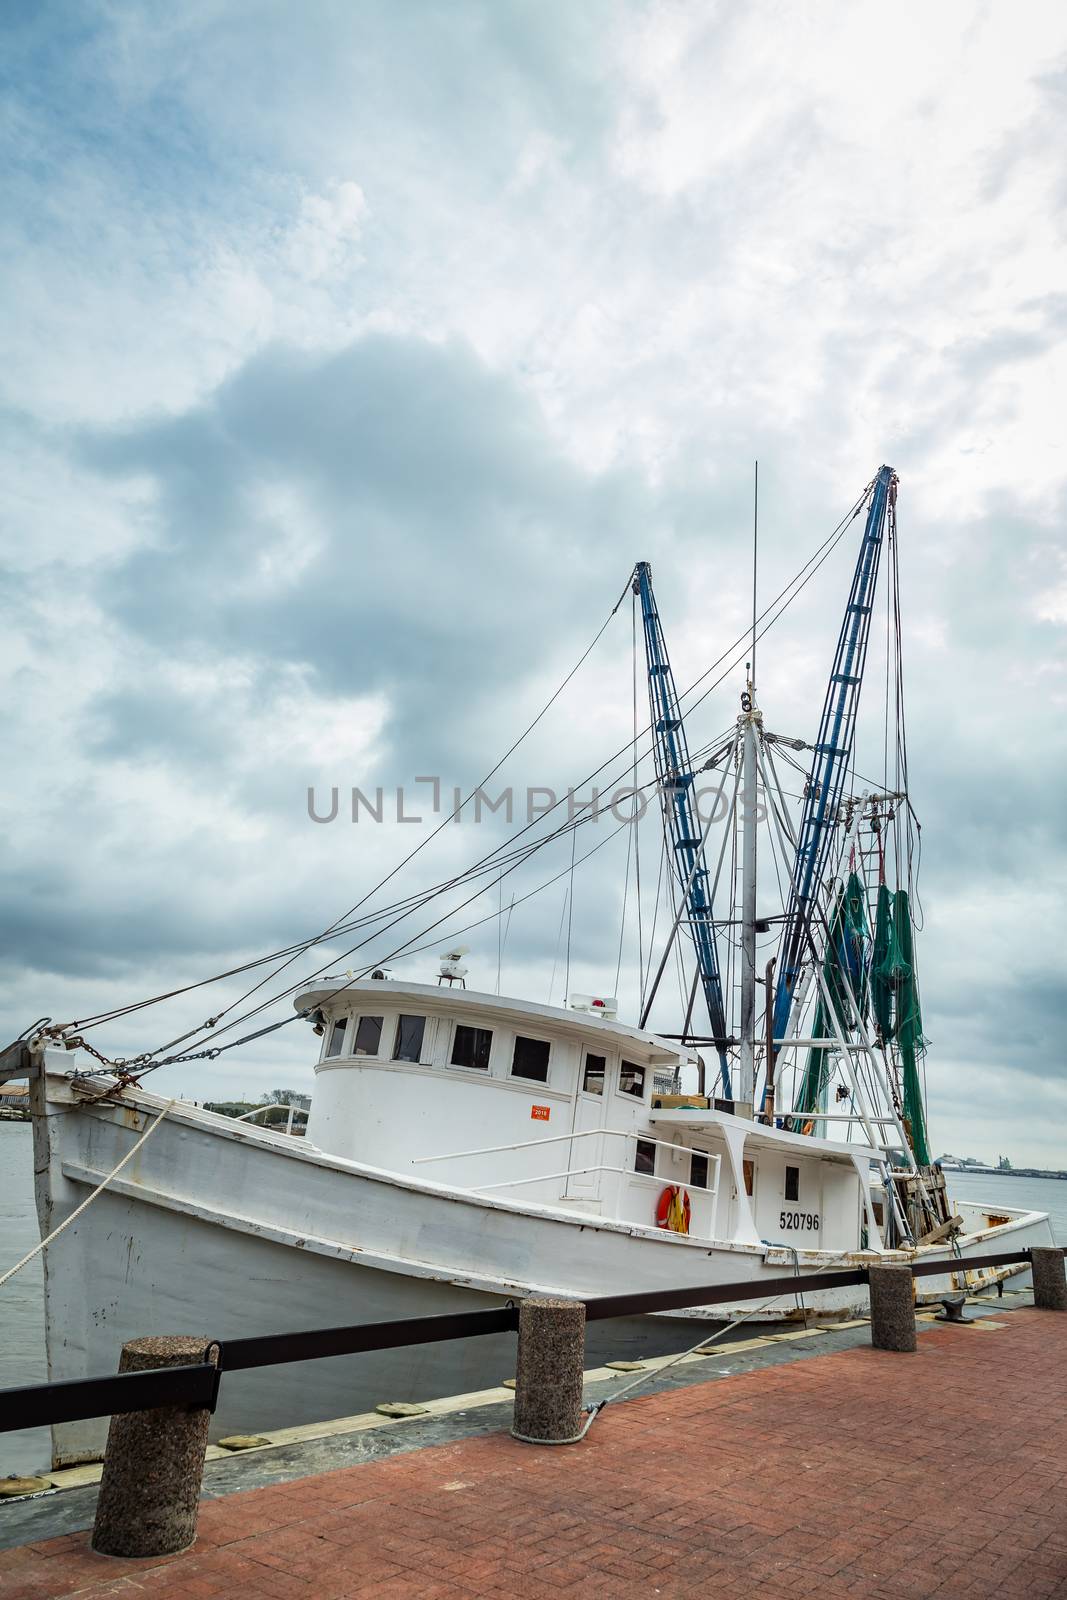 SAVANNAH, GEORGIA - MARCH 1, 2018: A shrimp boat is tied up on the River Street dock on the Savannah River.